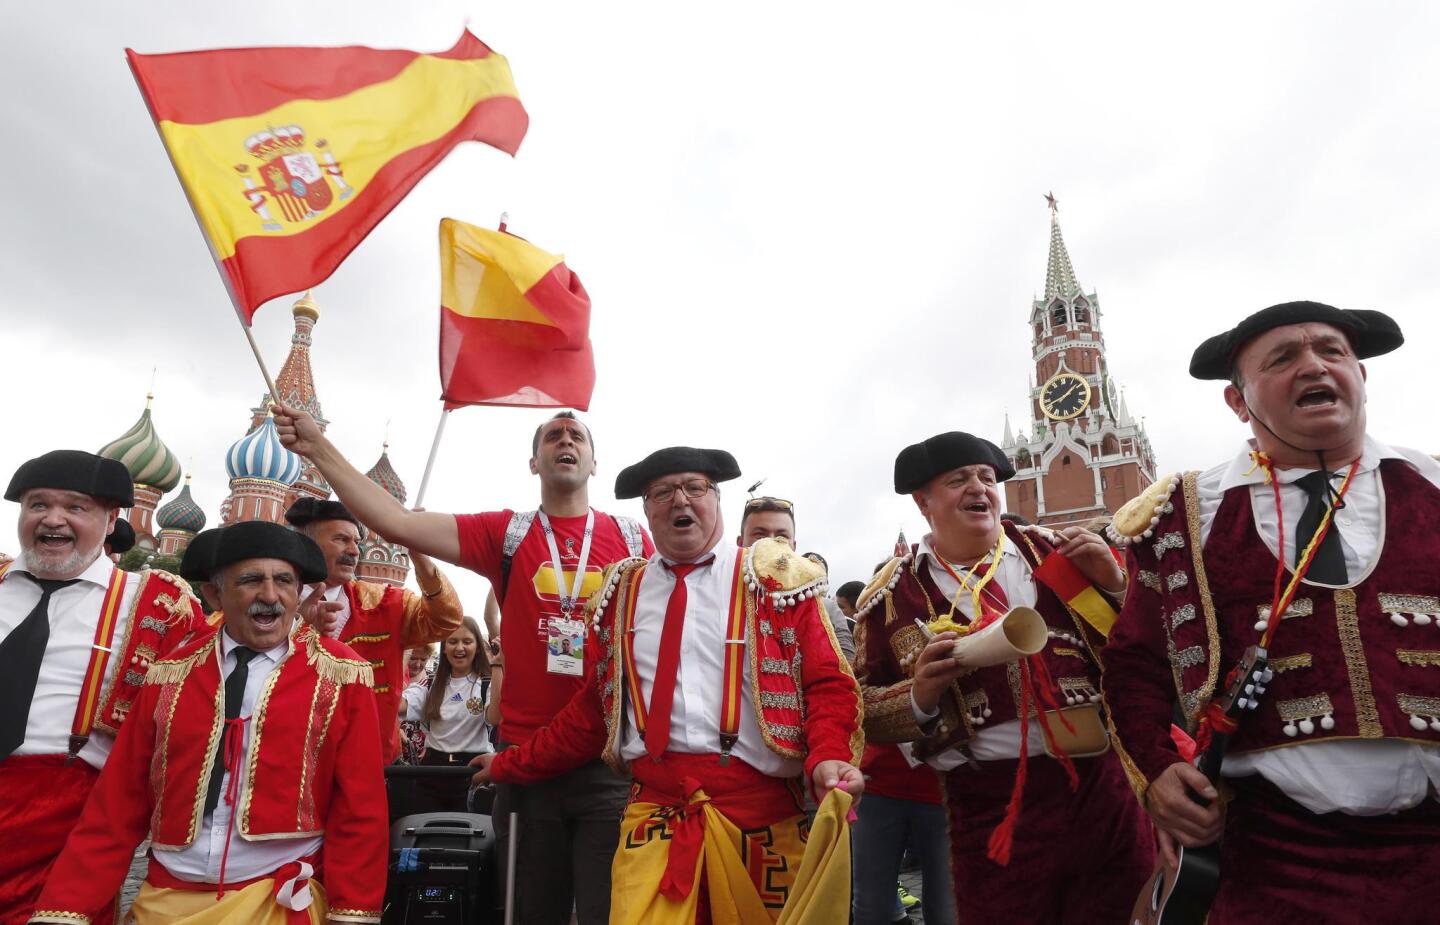 Soccer fans of Spain gather in the Red Square before the FIFA World Cup 2018 round of 16 soccer match between Spain and Russia in Moscow, Russia, 01 July 2018.